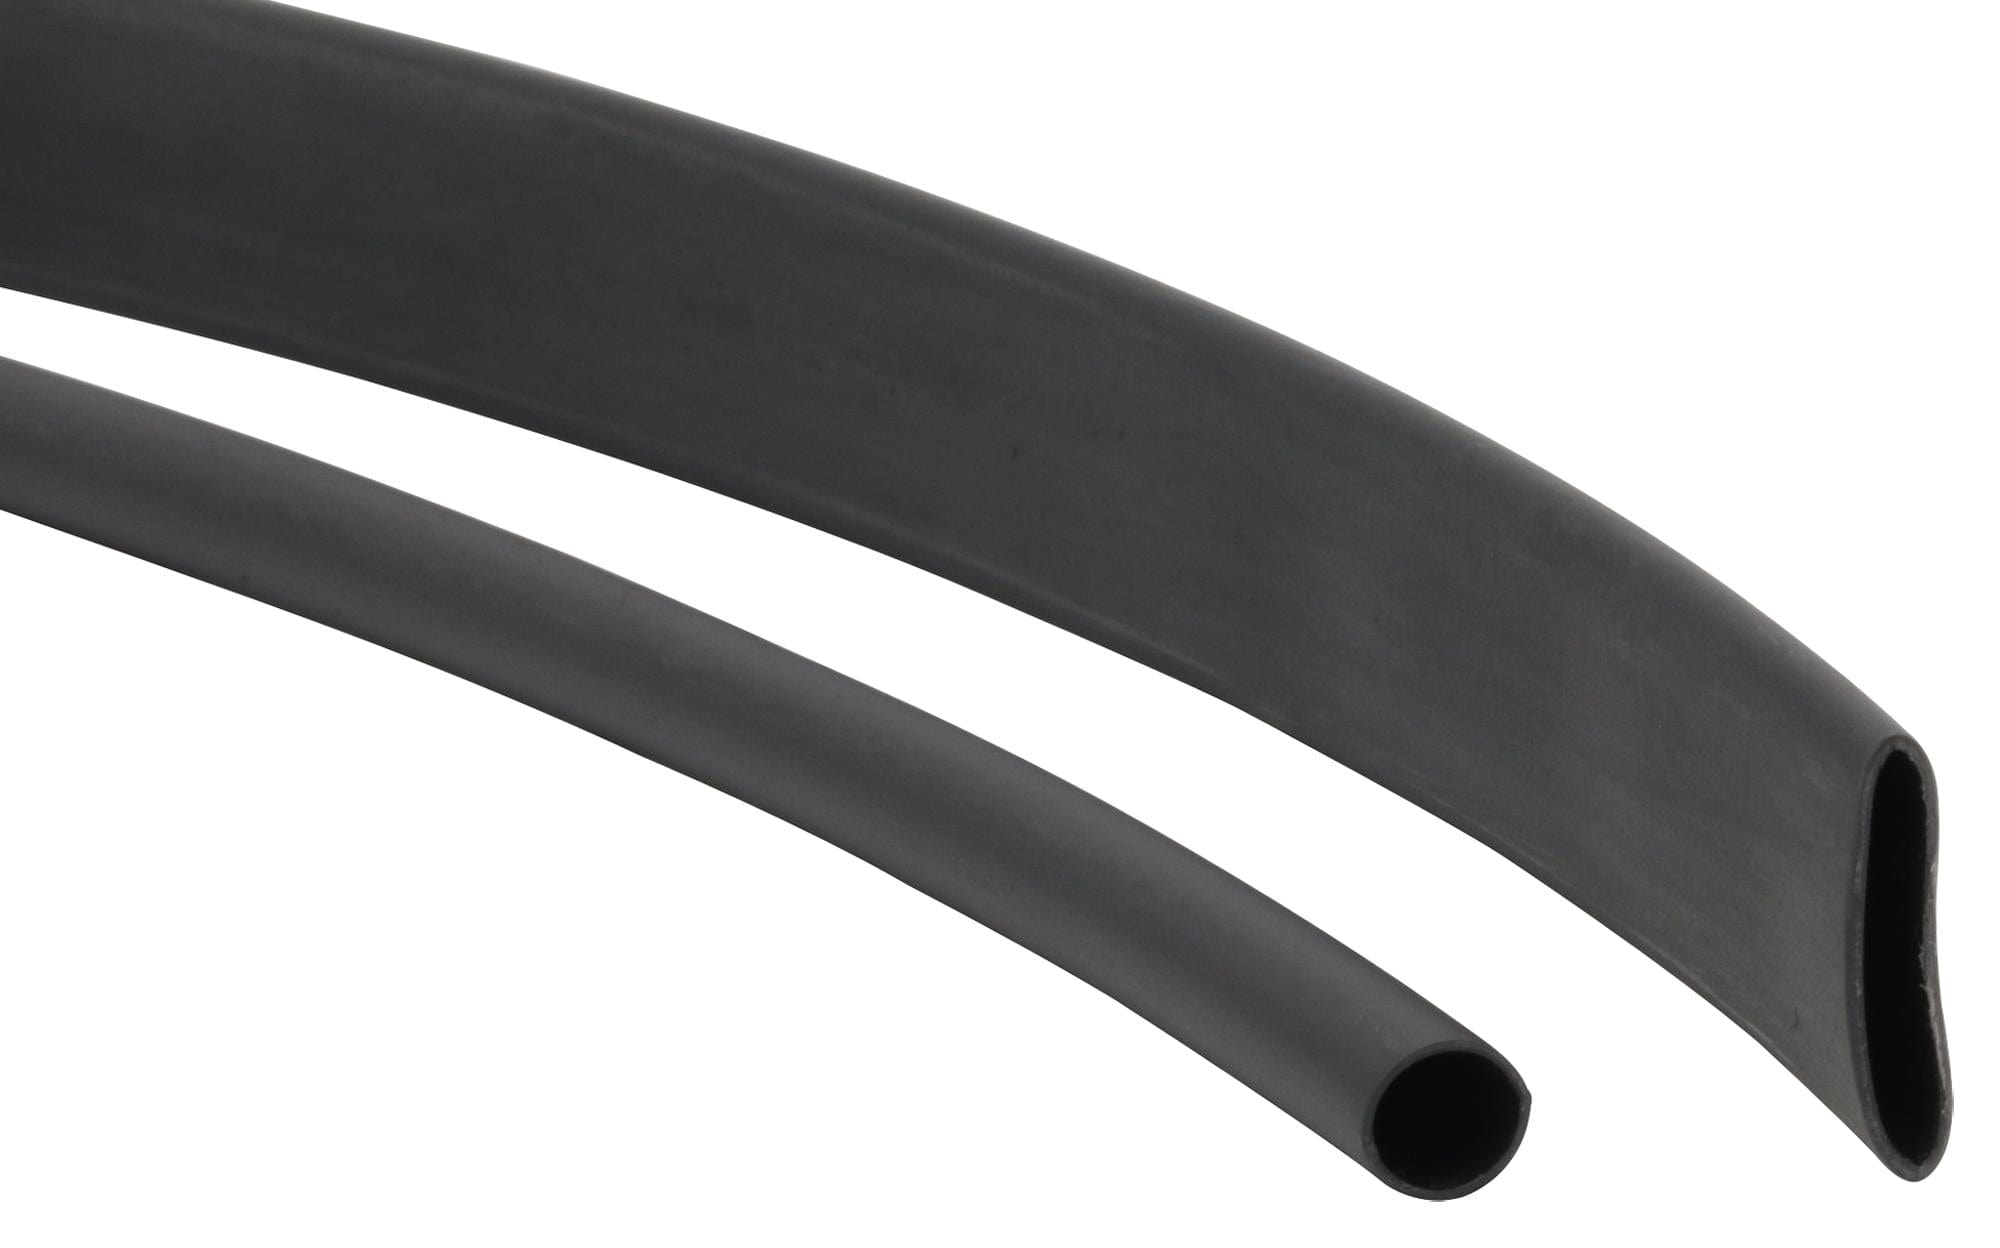 PRO POWER Shrink Tubing - Adhesive Lined PP001977 HEAT SHRINK TUBING, 12MM, 4:1, BLACK PRO POWER 2852616 PP001977